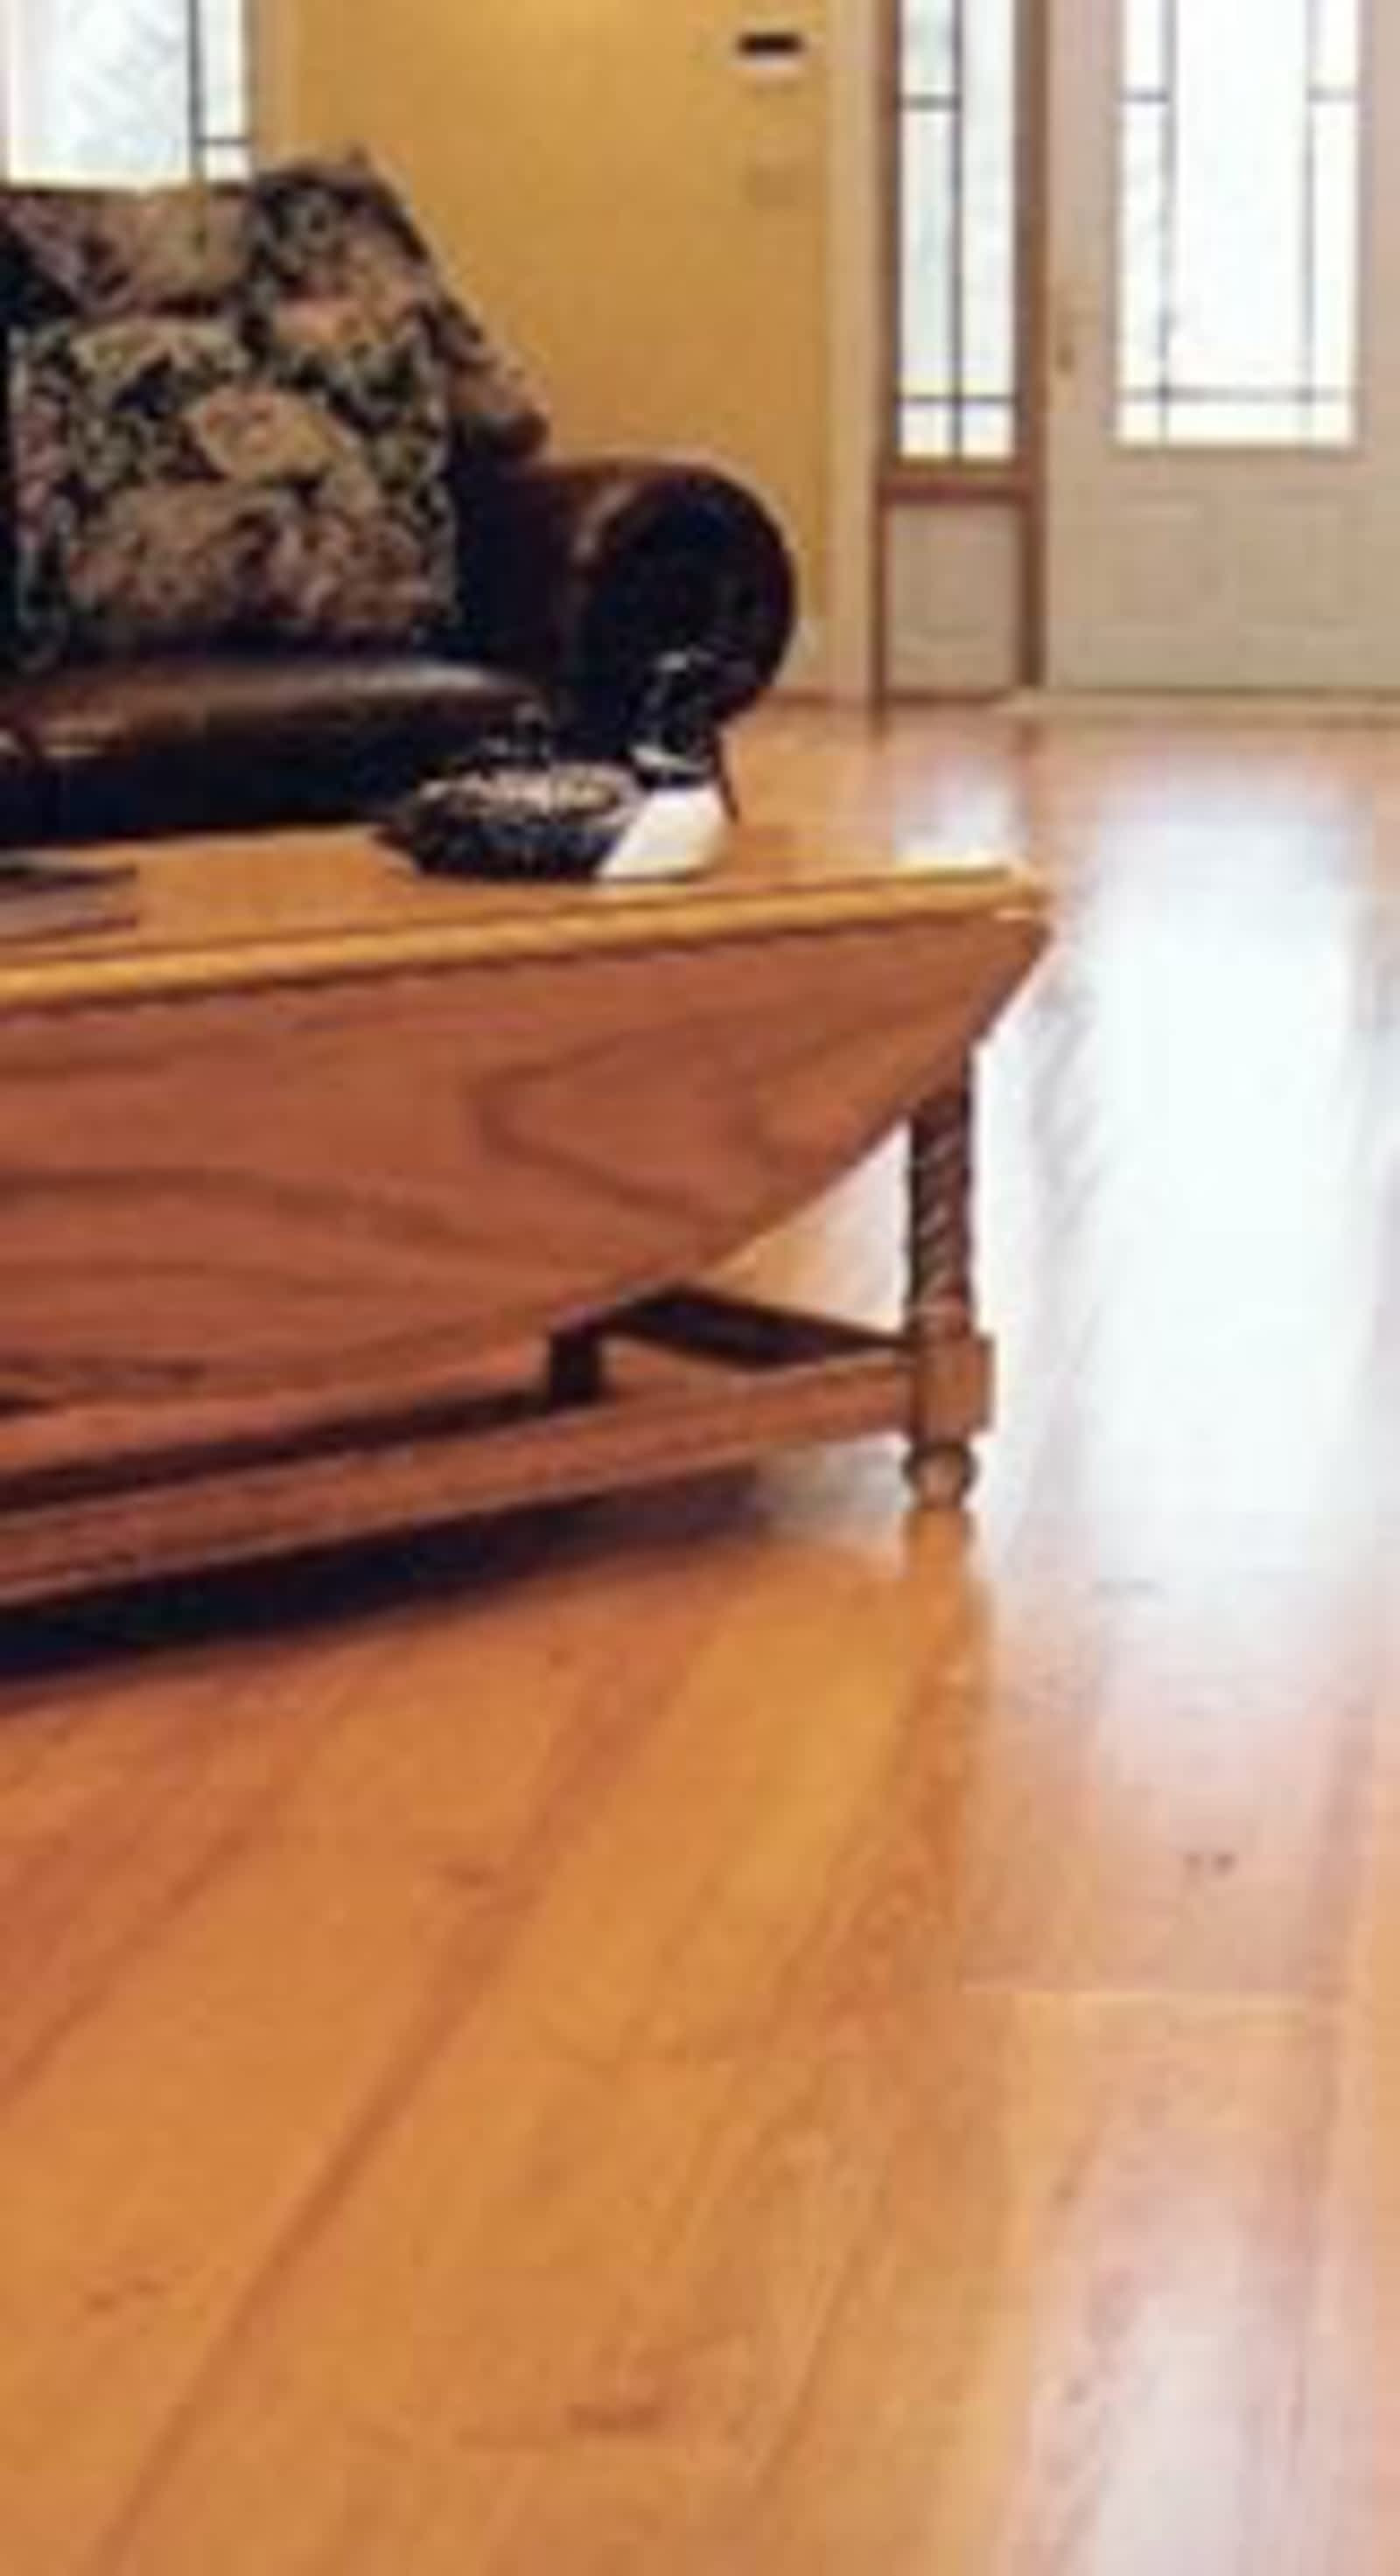 25 Perfect aspen Hardwood Flooring Mississauga 2024 free download aspen hardwood flooring mississauga of aspen hardwood flooring mississauga carpet floor in our gallery aspen wood floors credit to http www aspenwoodfloors com our gallery